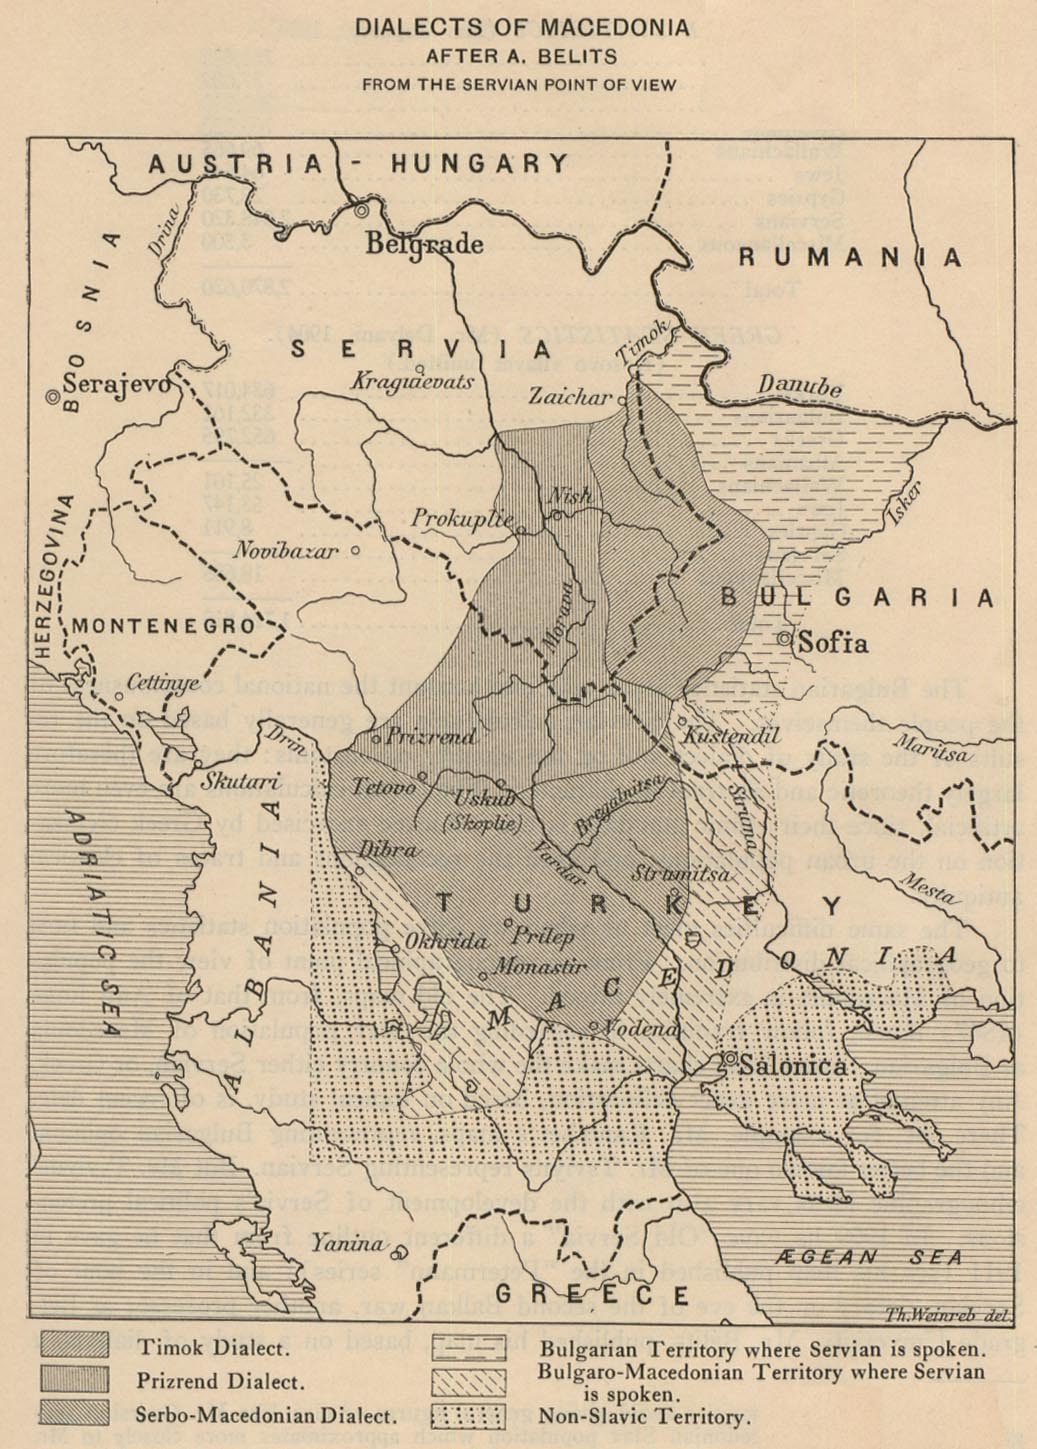 Map of Macedonia - Dialects 1914